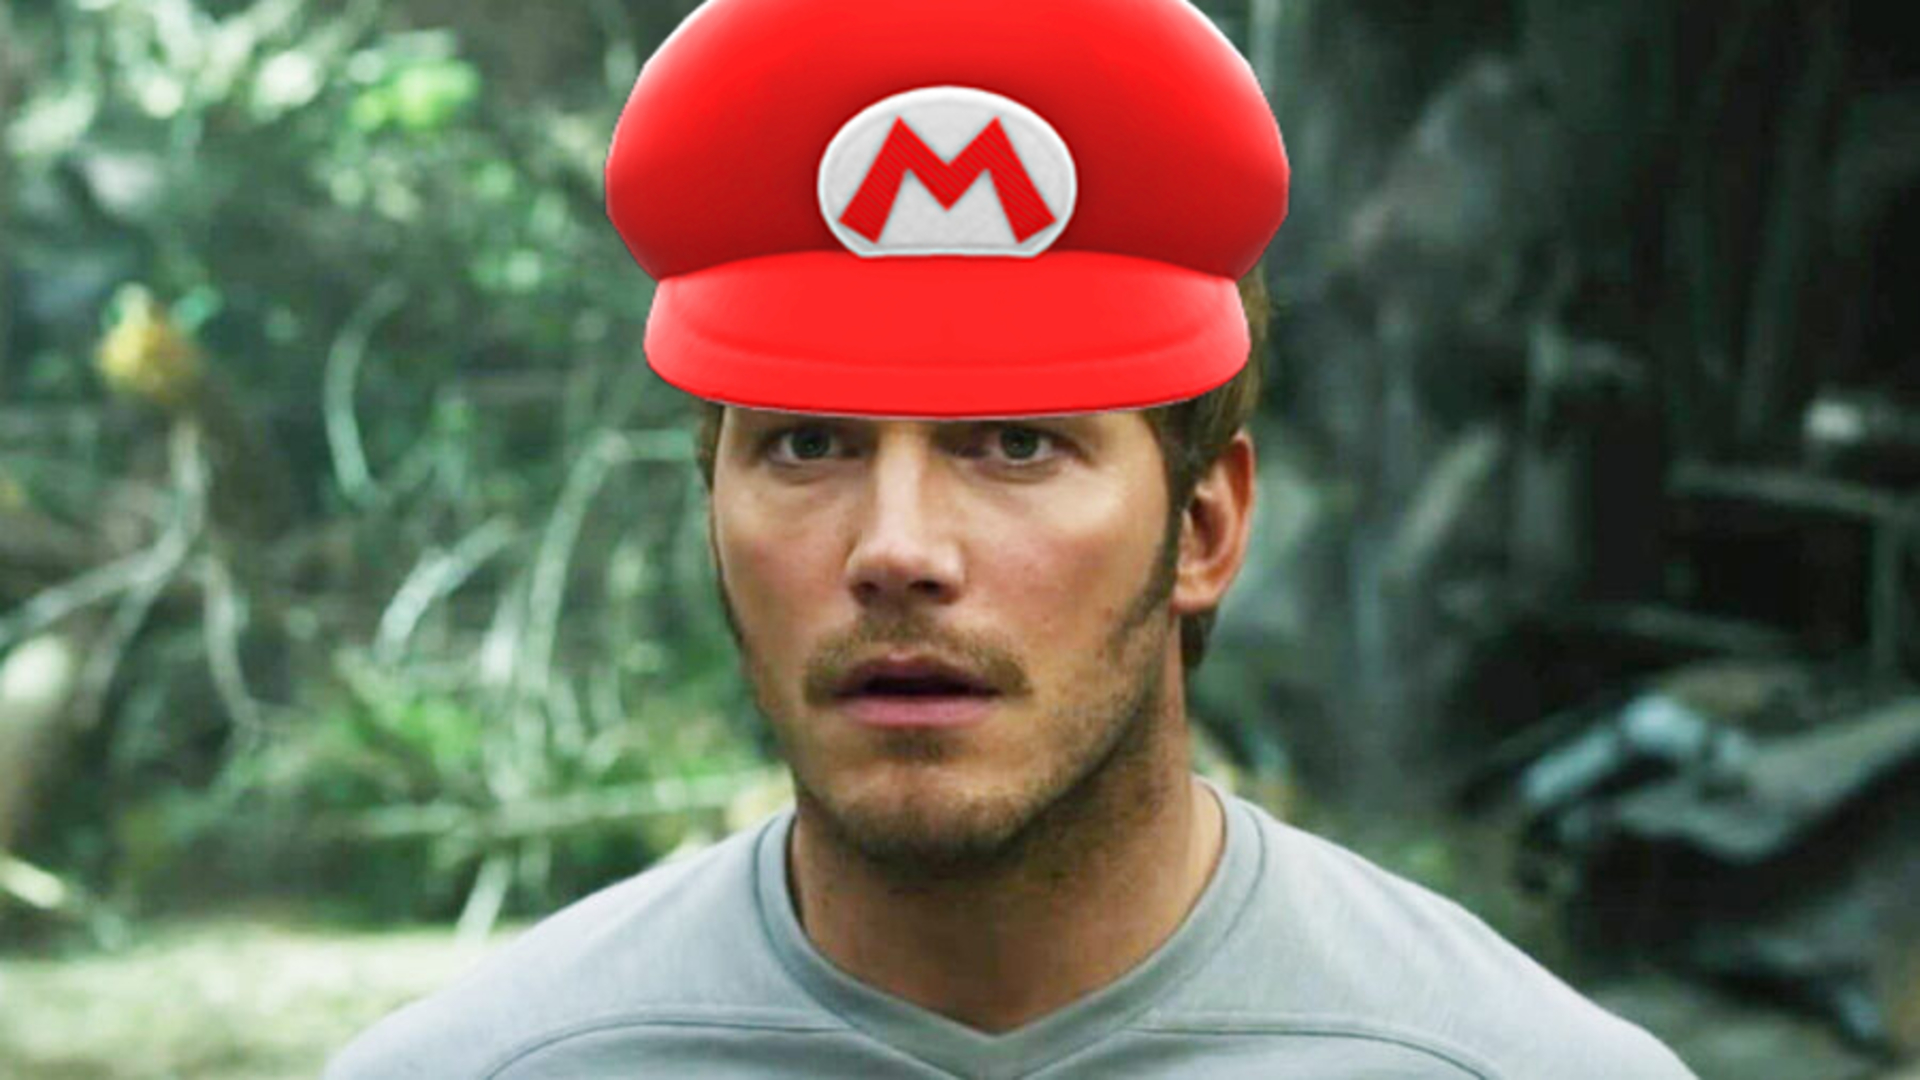 Mario animated movie stars Chris Pratt, Jack Black, and Seth Rogen, and it's coming in 2022